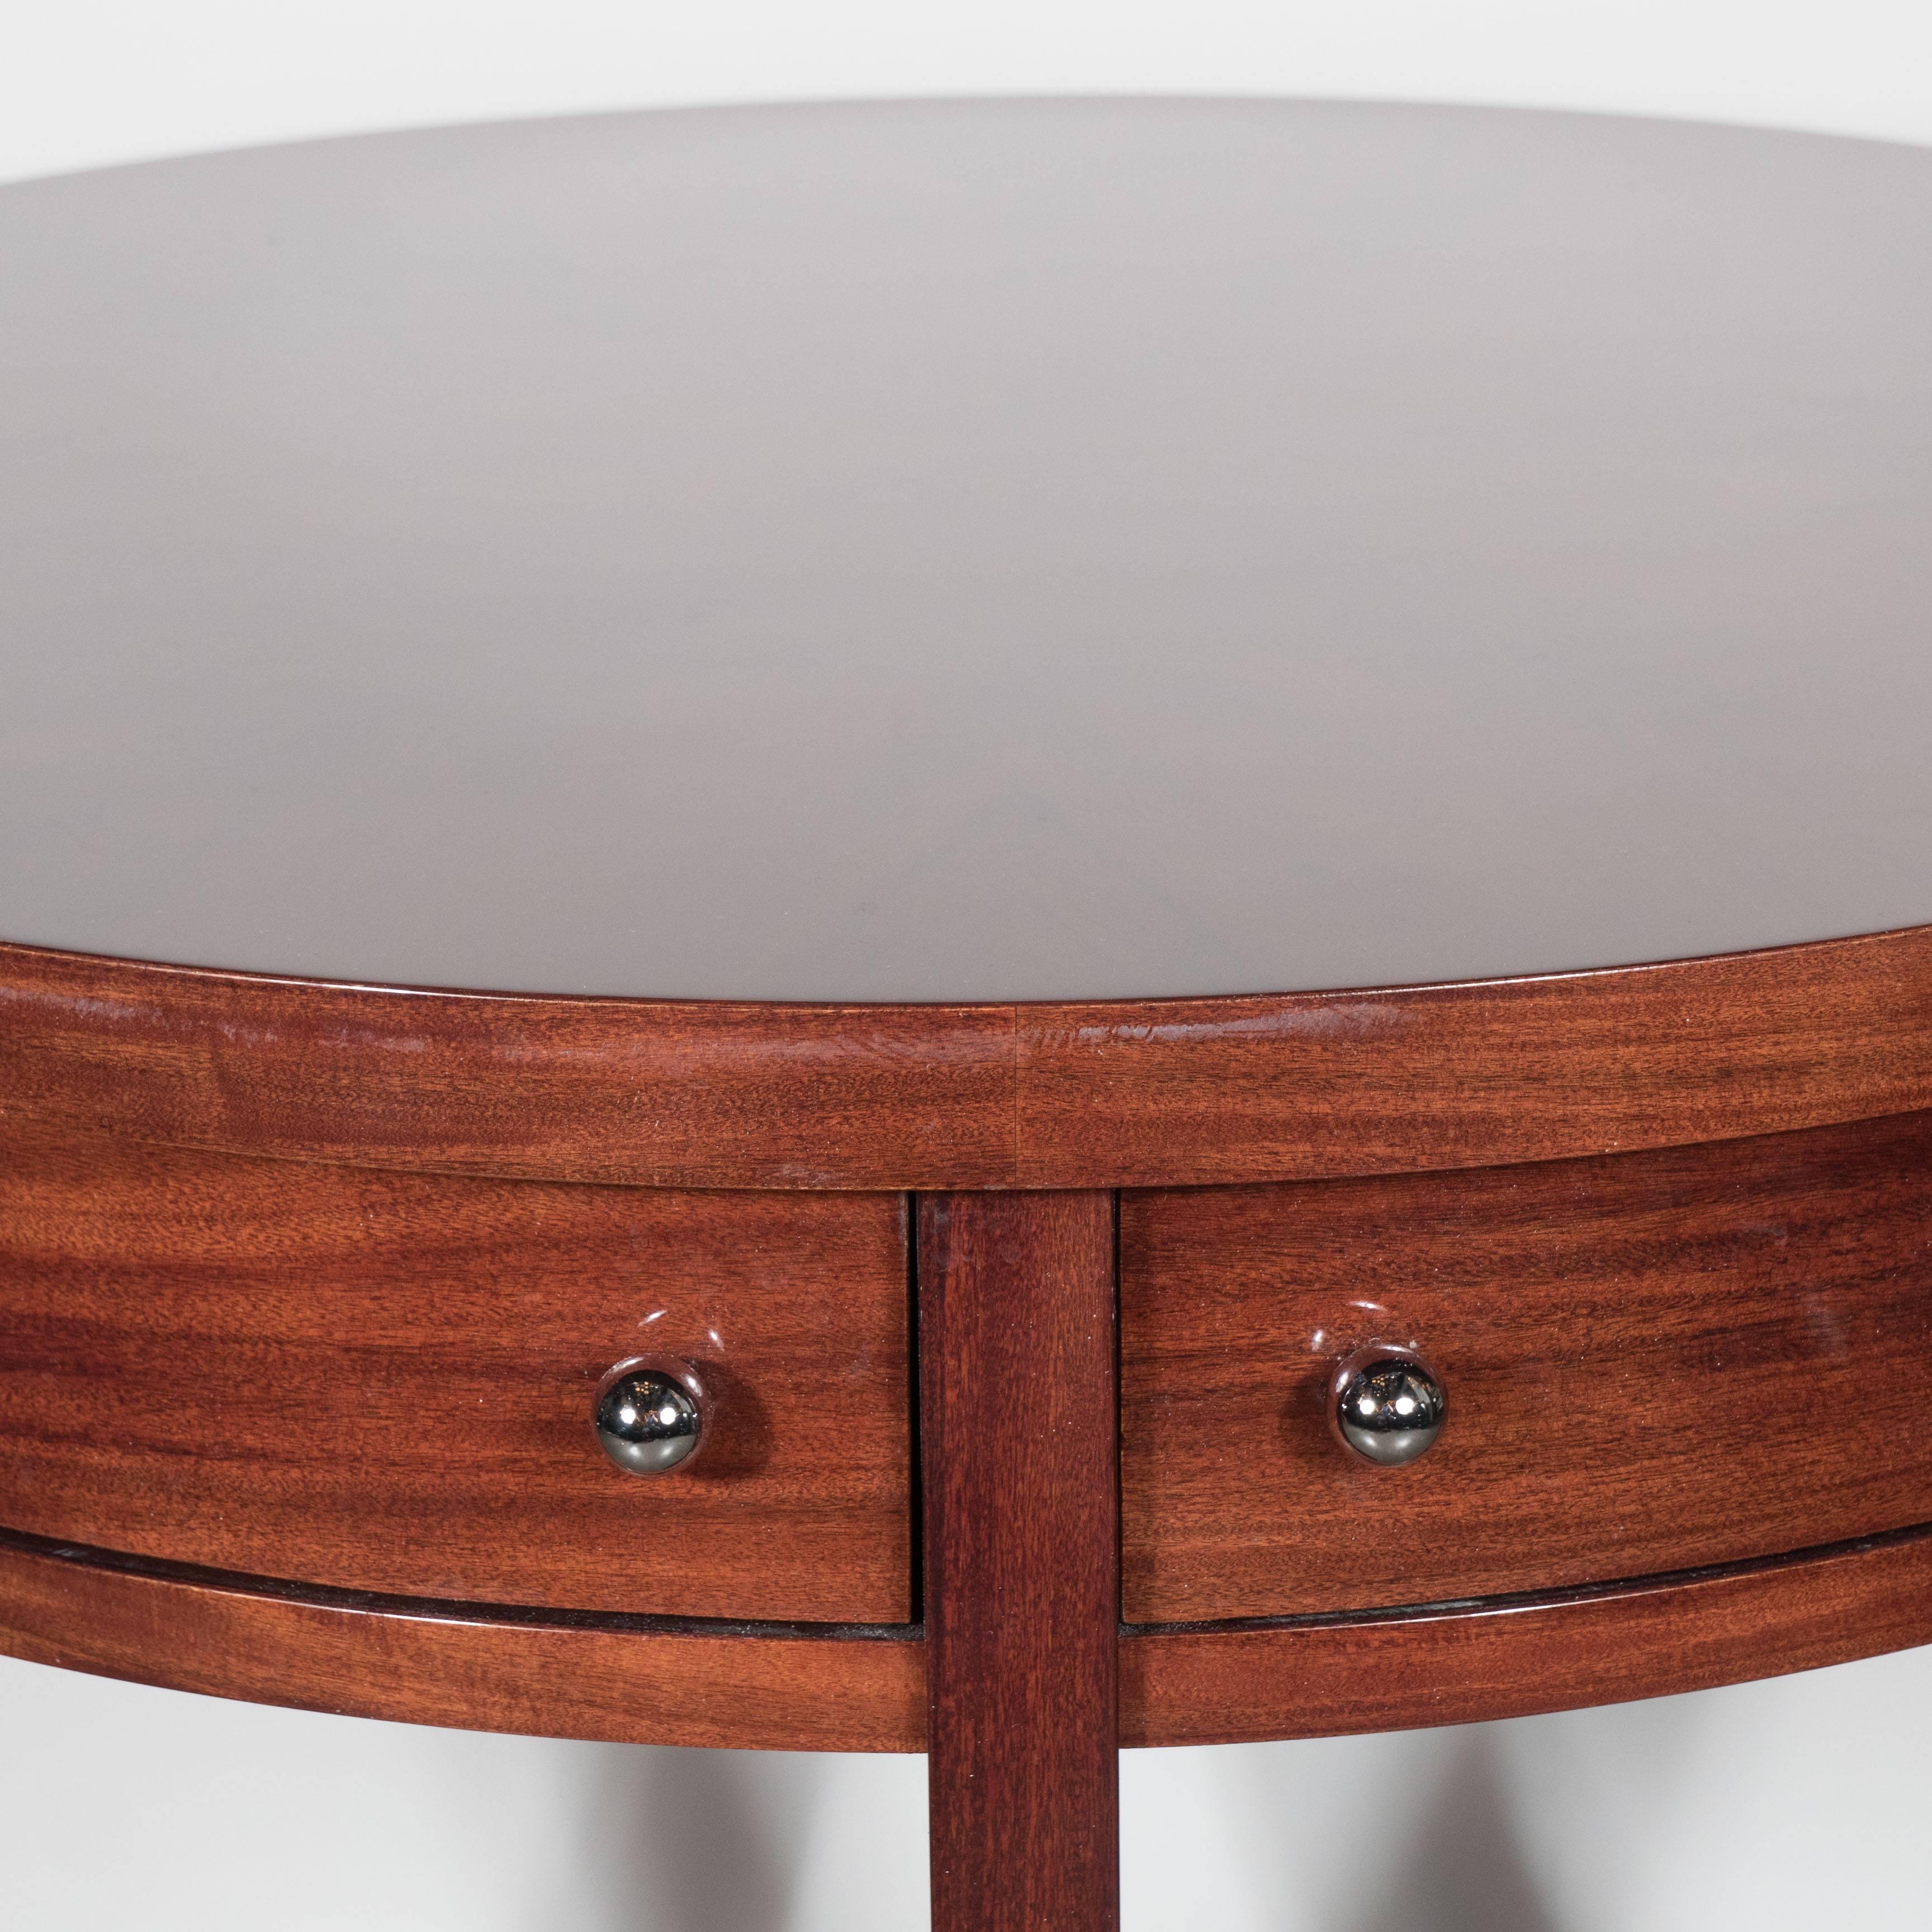 Art Deco Guerin Compass-Style Table in Book-Matched Mahogany and Chrome Pulls 1